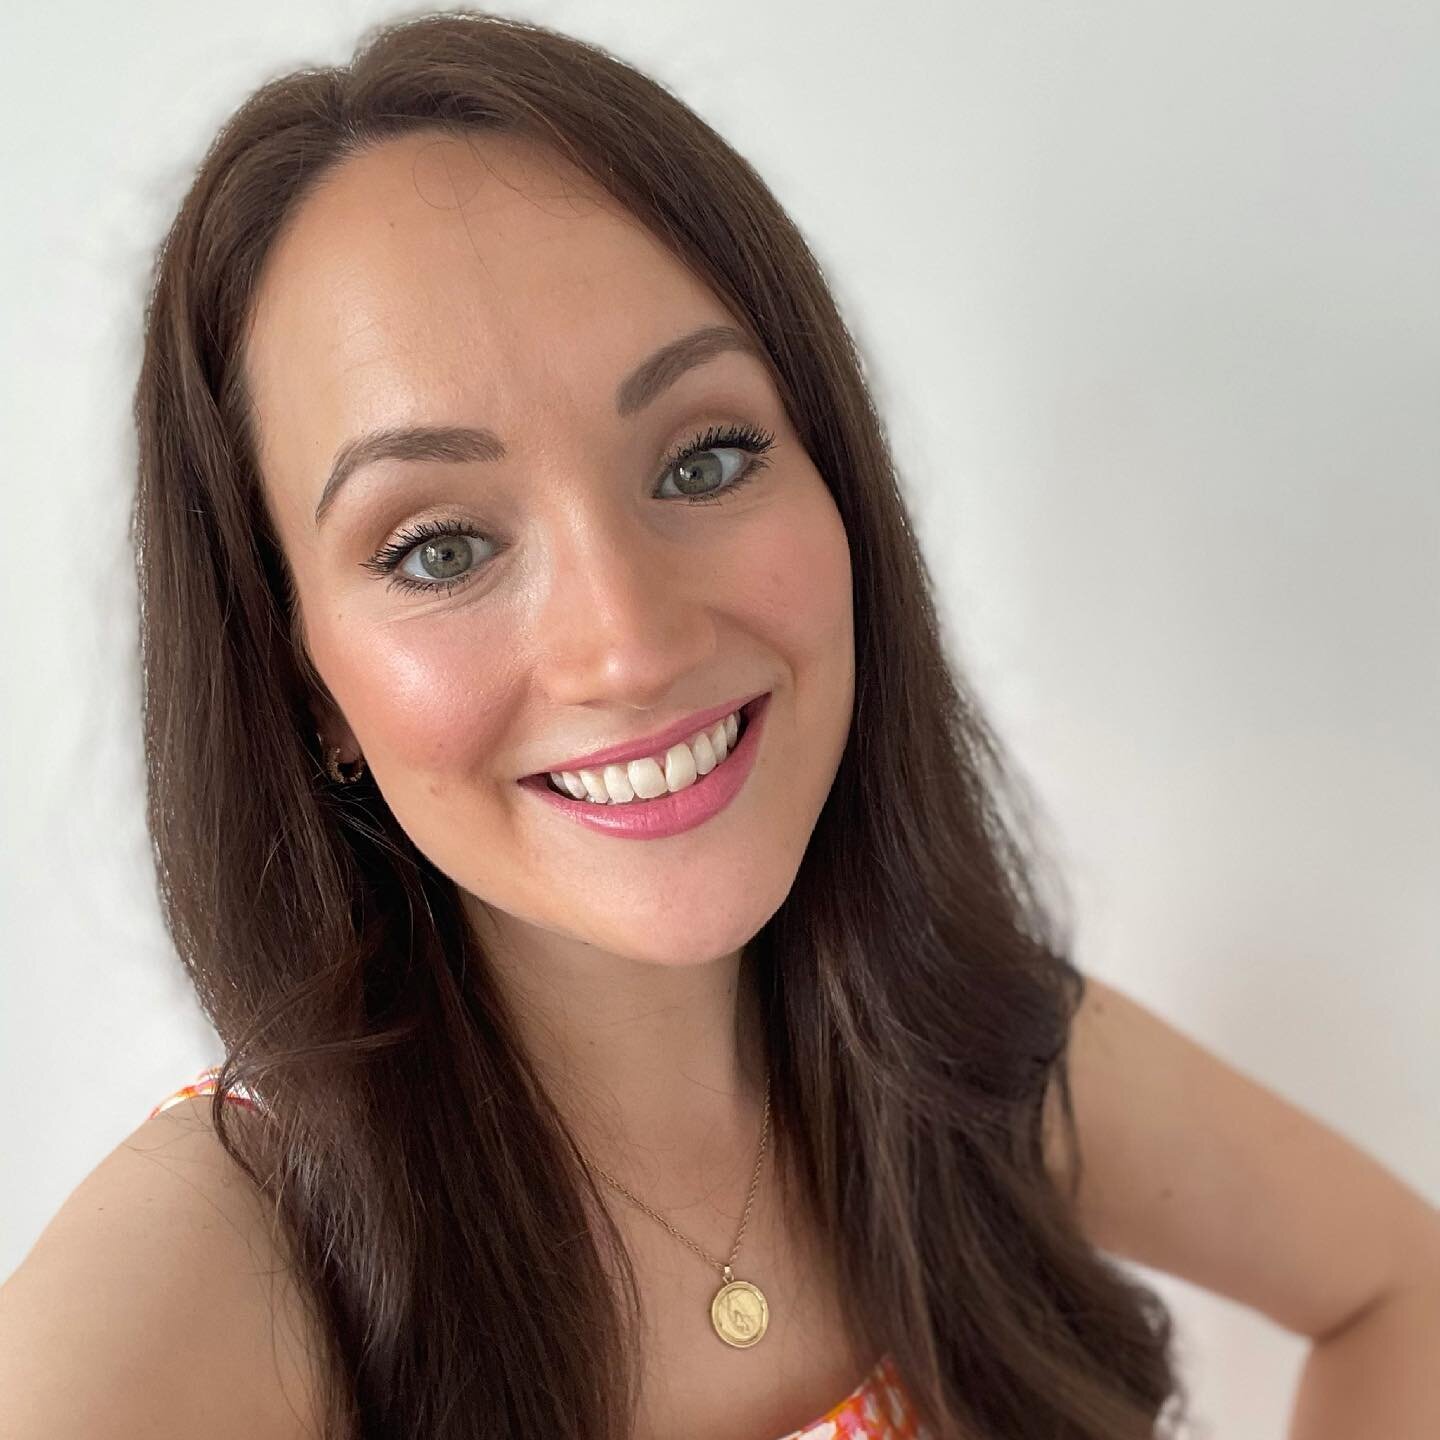 &ldquo;Hello, it&rsquo;s me...&rdquo; (did you sing it? 😉)

There have been some changes around here recently so I thought it was time to re-introduce myself!

I&rsquo;m Katy - Hypnotherapist, Birth Worker, Mum to one, wife and small business owner.